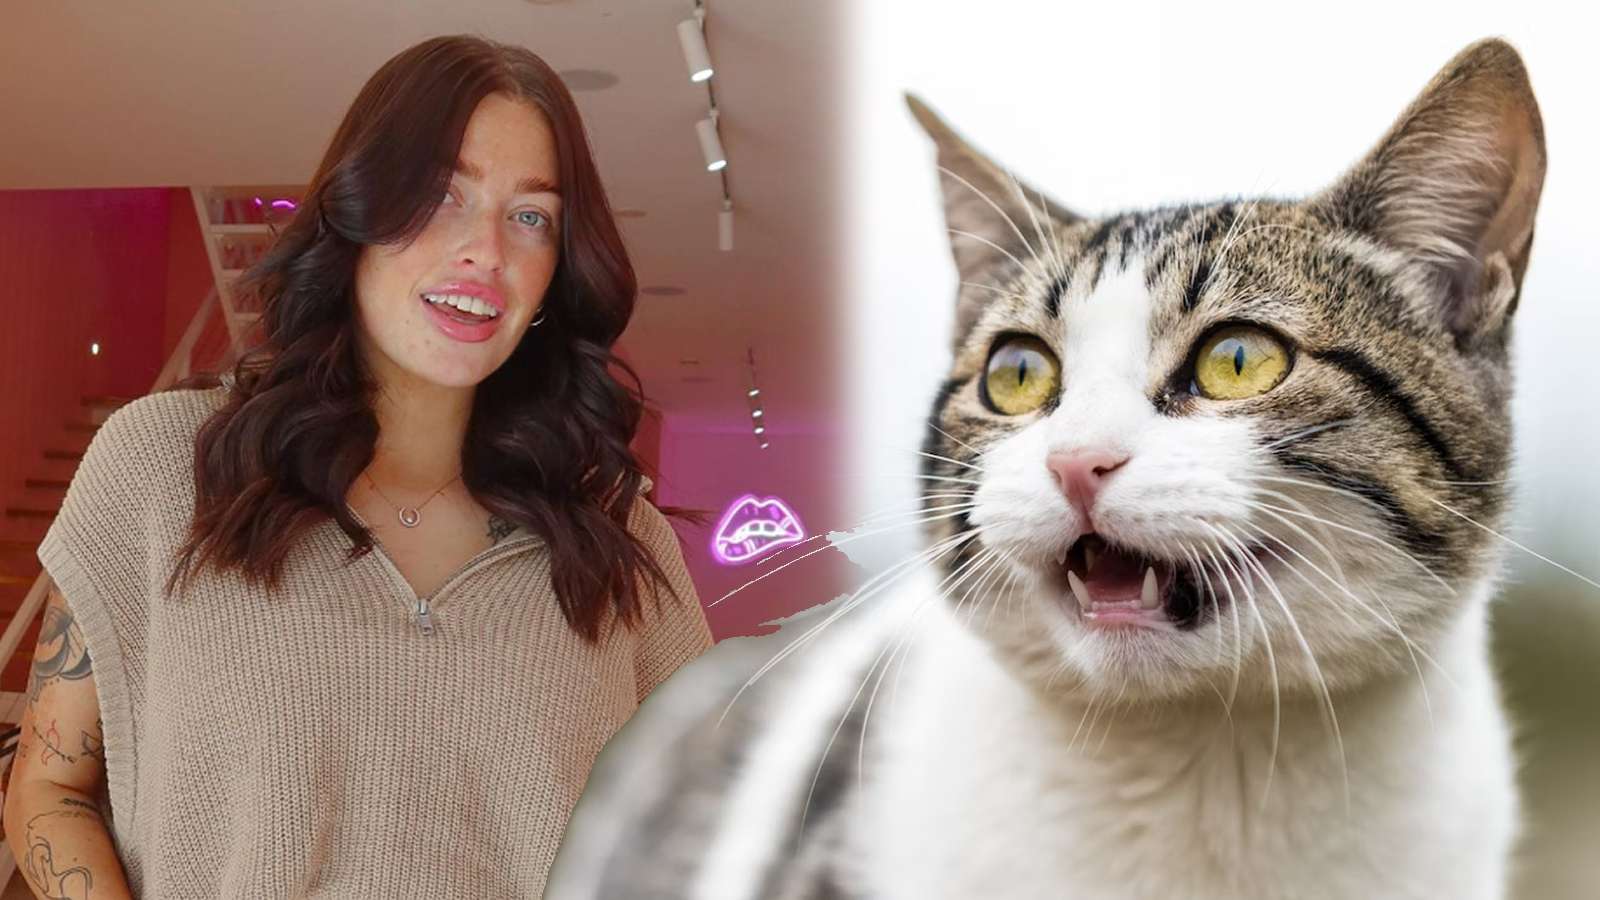 Aussie influencer quits social media due to backlash over killing two cats